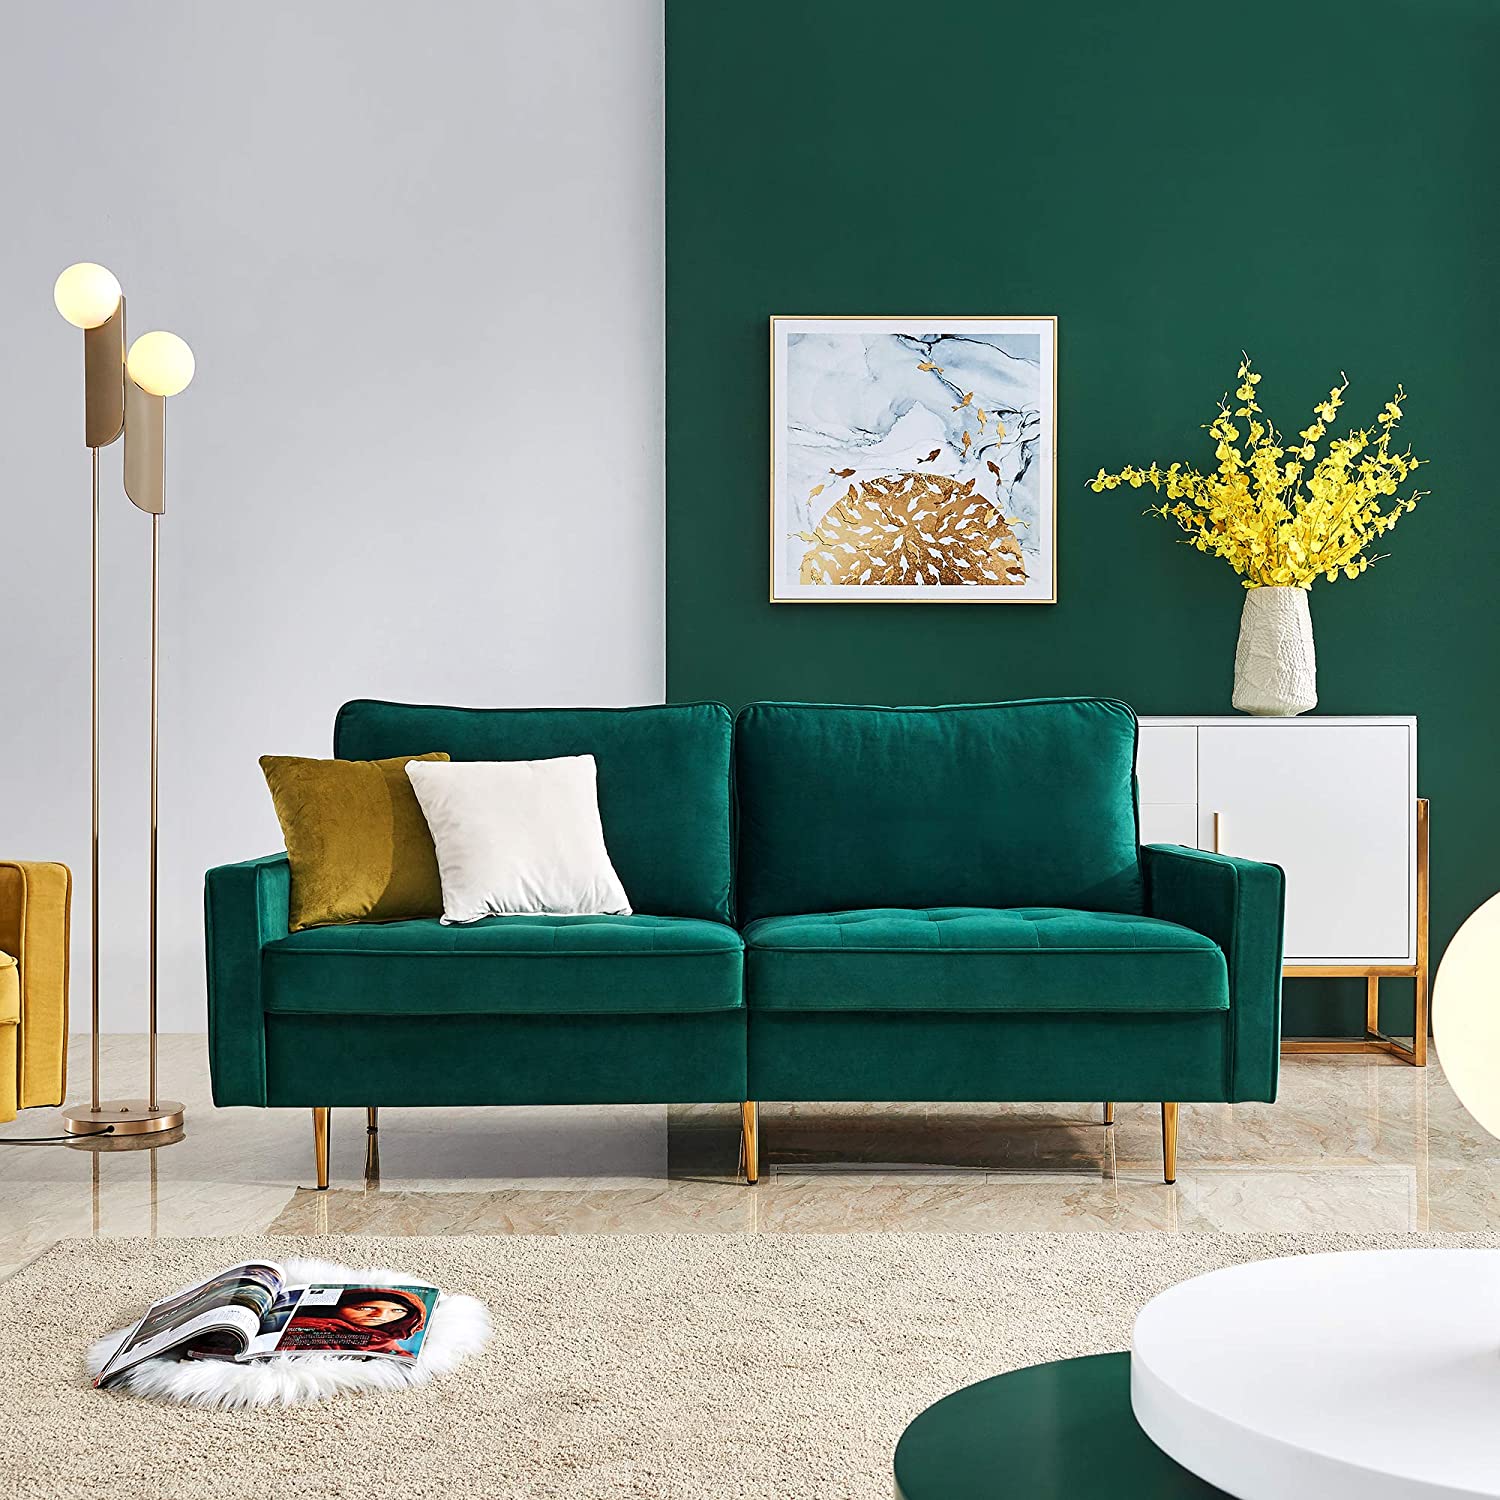 Proportioneel Perseus Laptop 51 Small Sofas For Stylish Space-Saving Comfort Anywhere